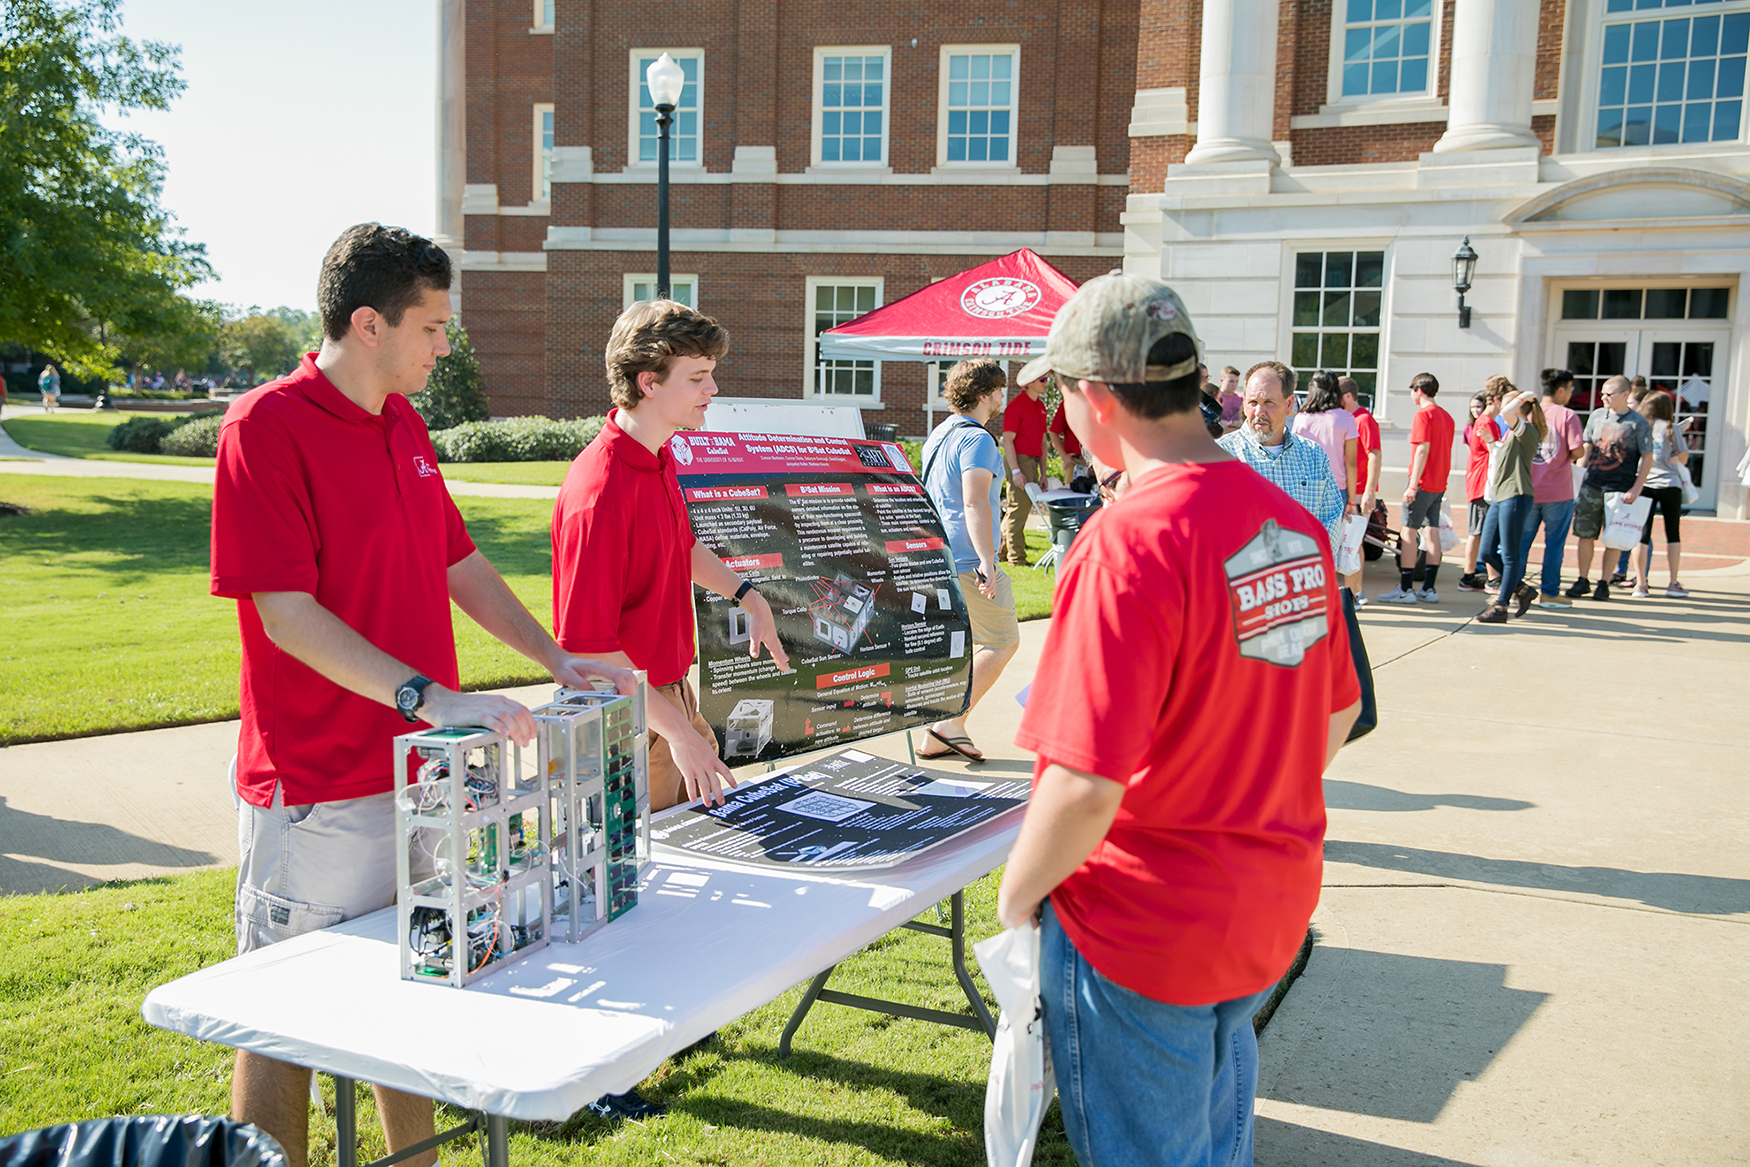 UA students talk with prospective students outside of a campus building.